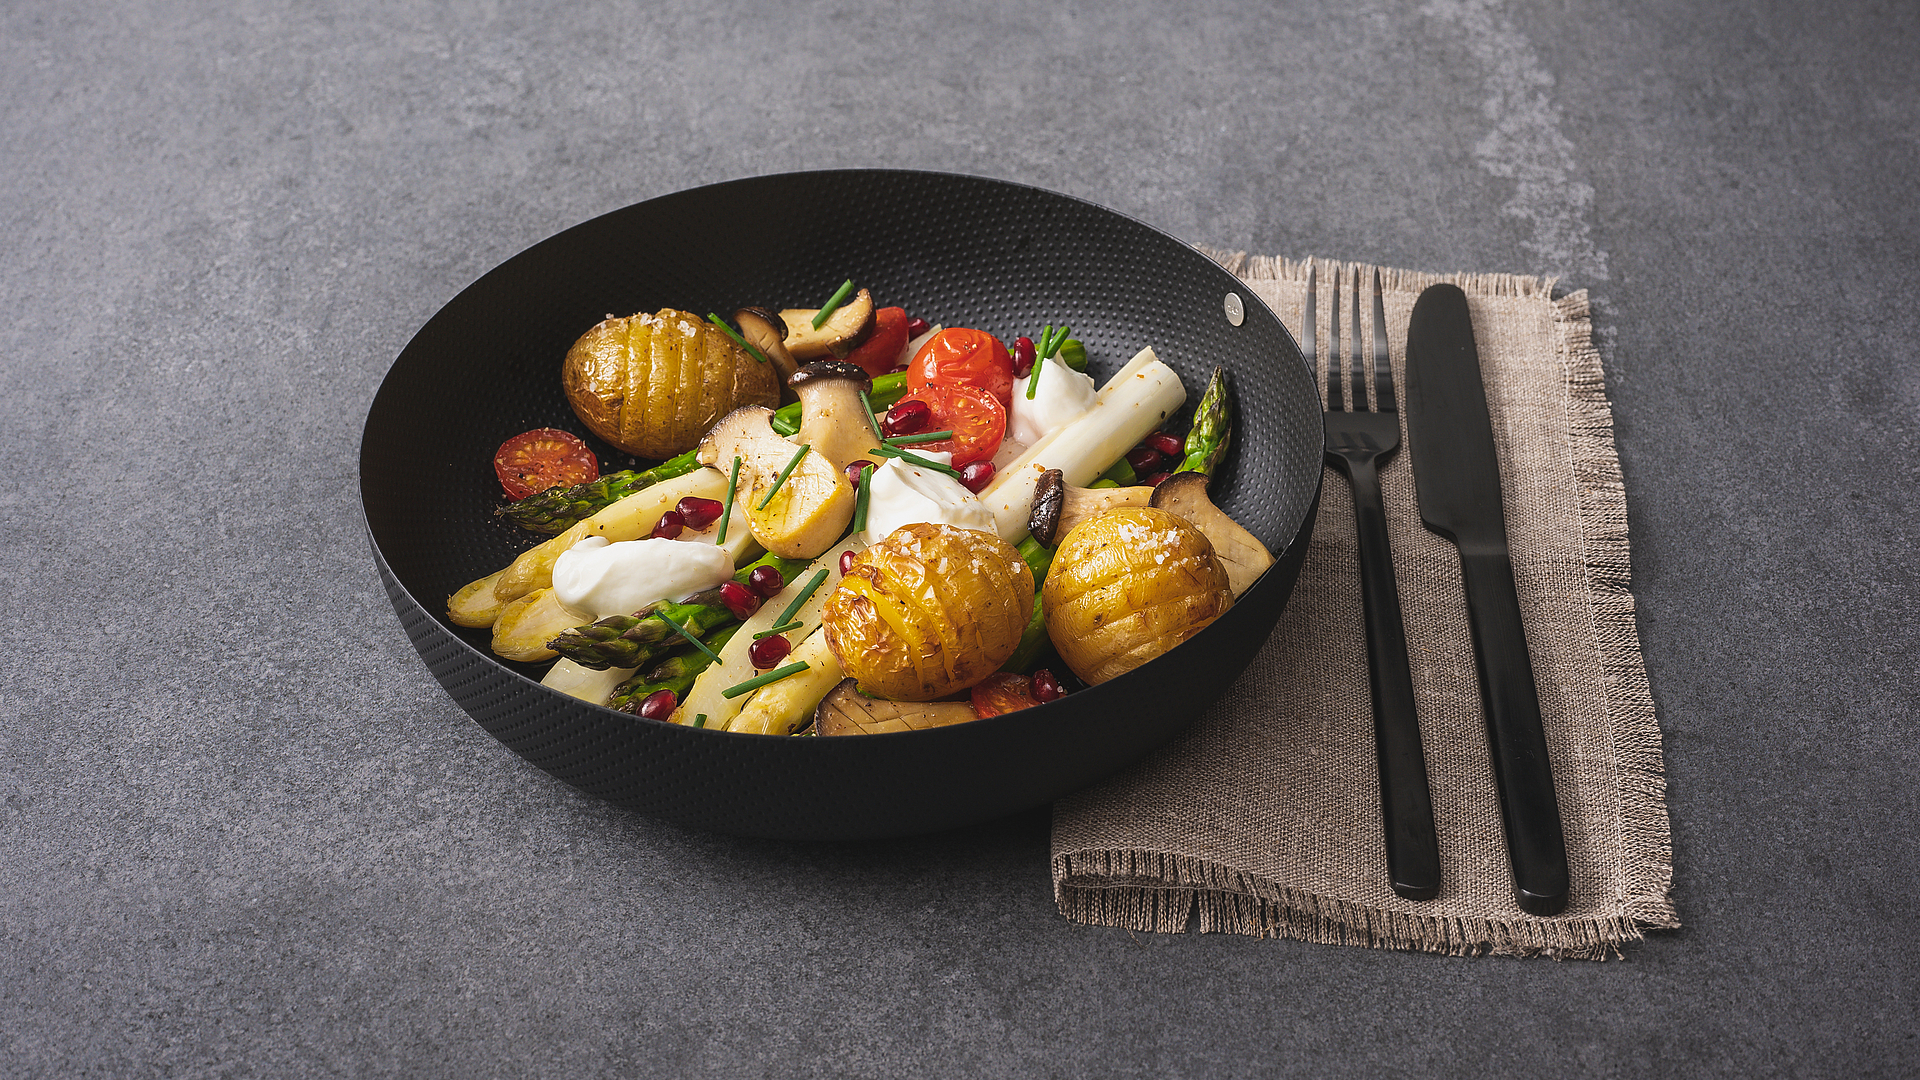 Oven-roasted asparagus with hasselback potatoes